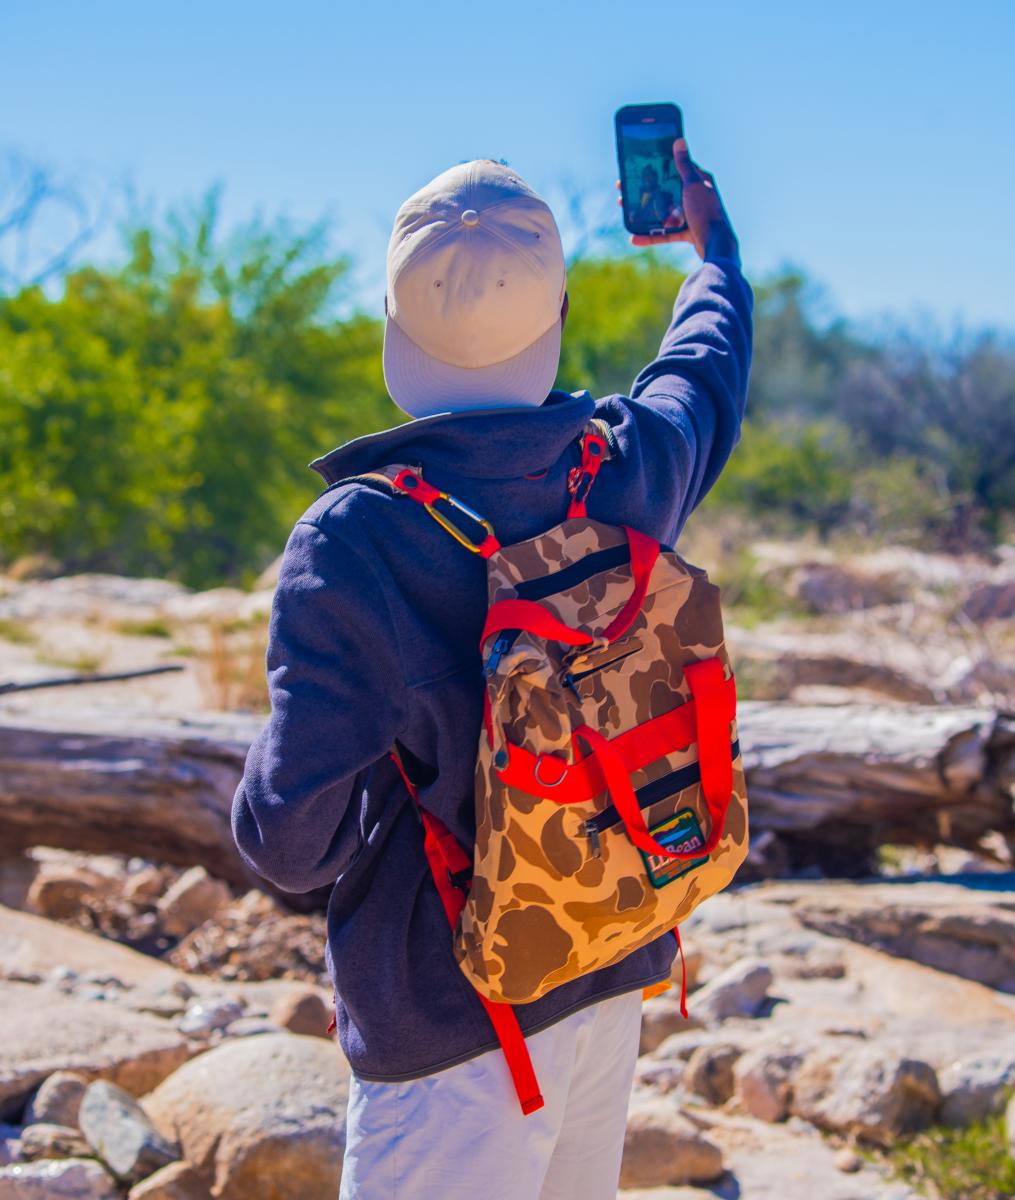 Person in outdoor gear holding up a phone for a photo in the Sonoran dessert